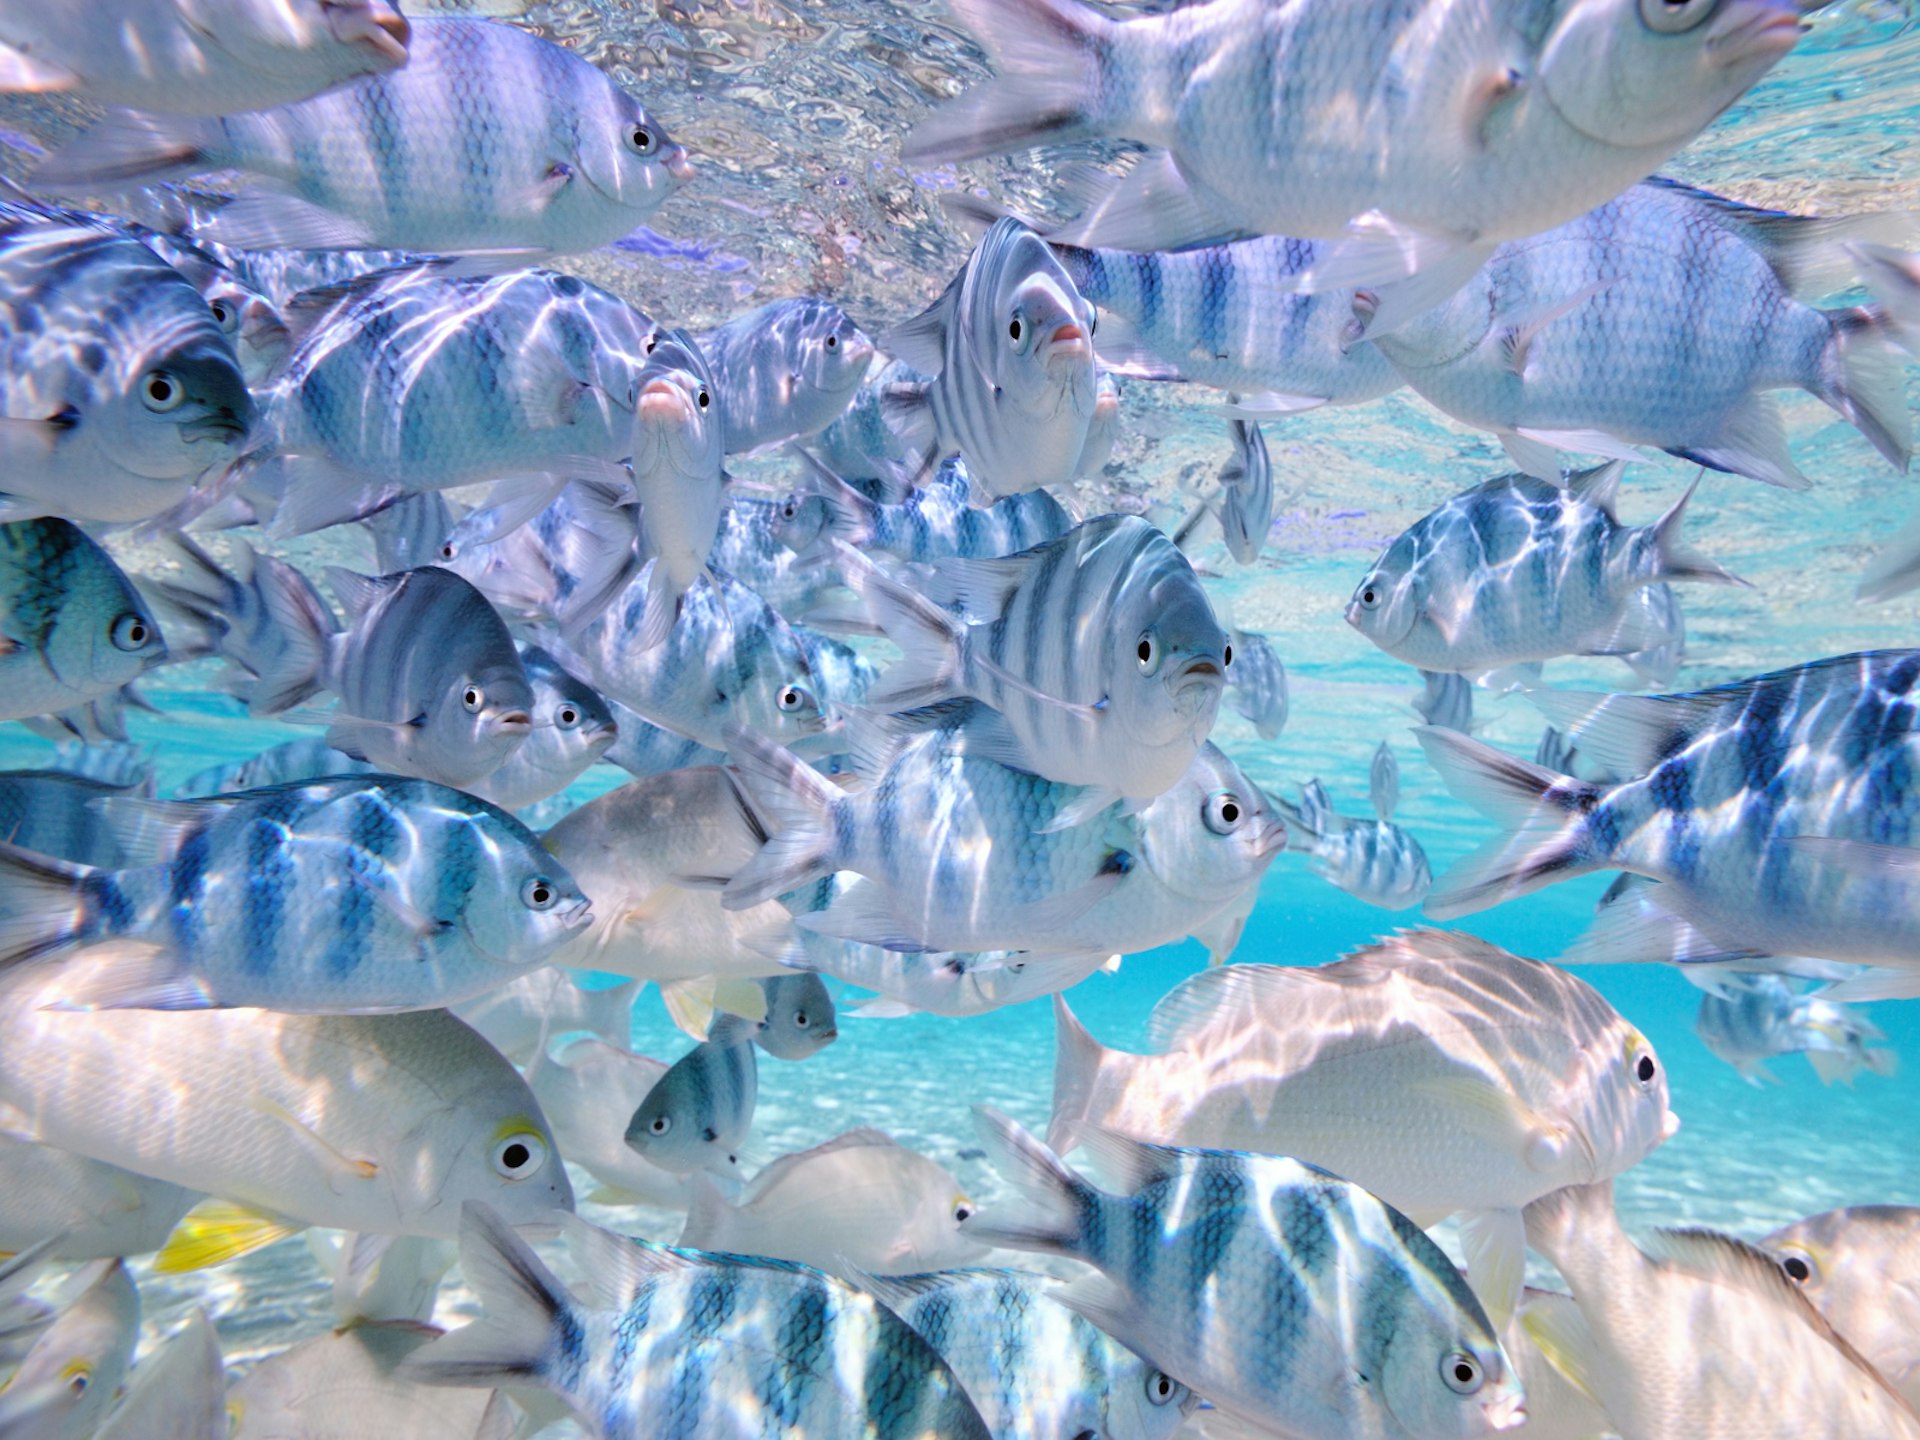 Many blue-and-white striped fish, and some silver fish with yellow fins, gather in very clear blue waters in the Cook Islands